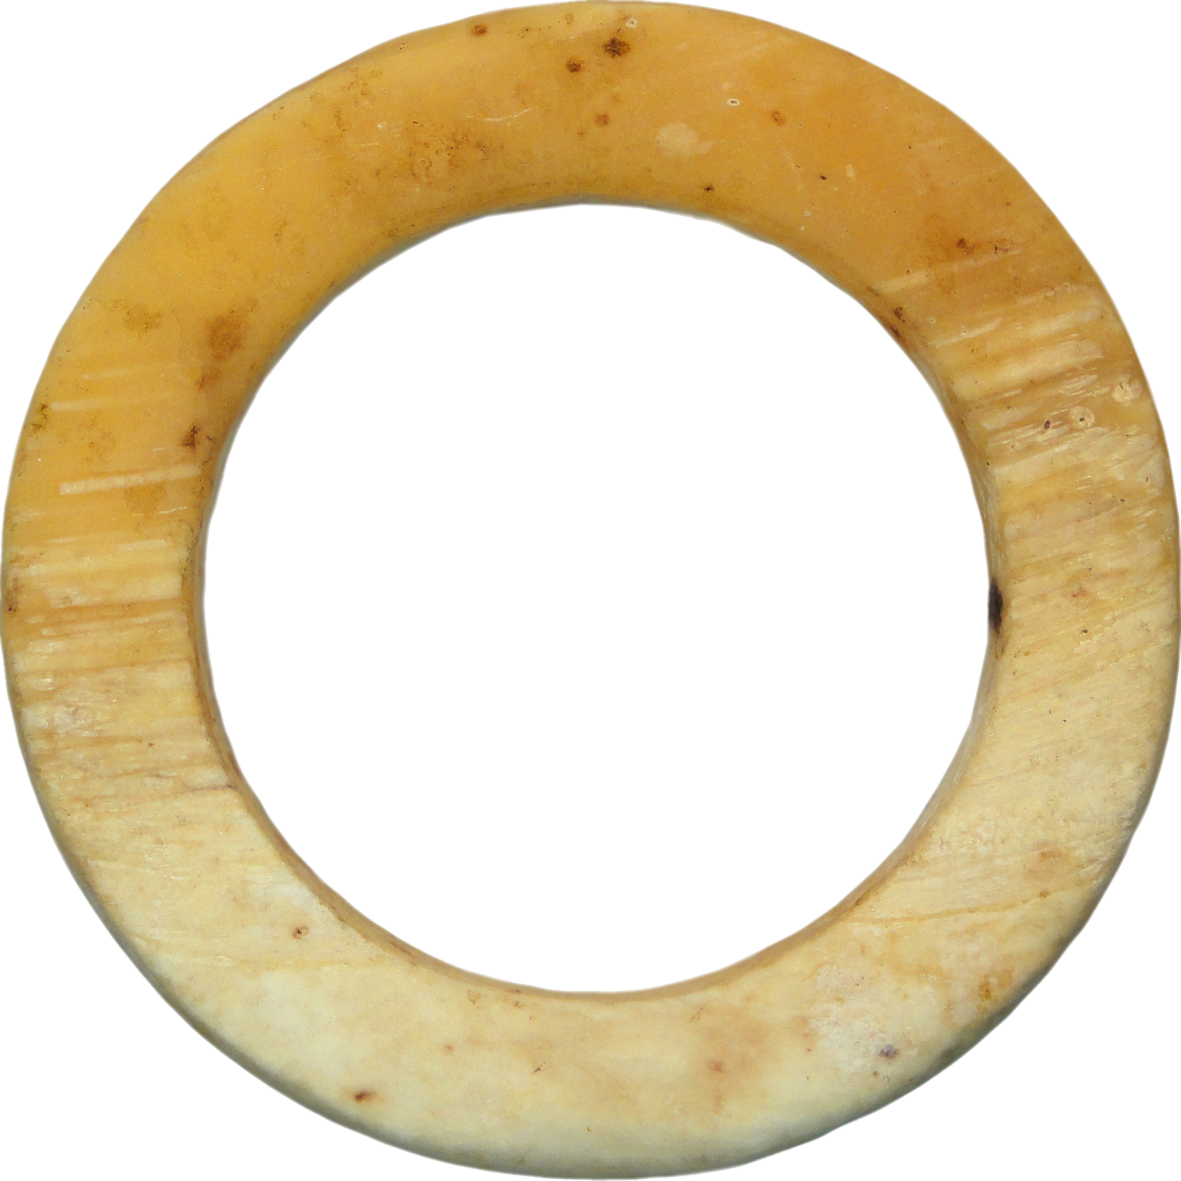 Melanesia, Western Solomon Islands, Bakia Clam Shell Ring with a High Proportion of Yellow (obverse)